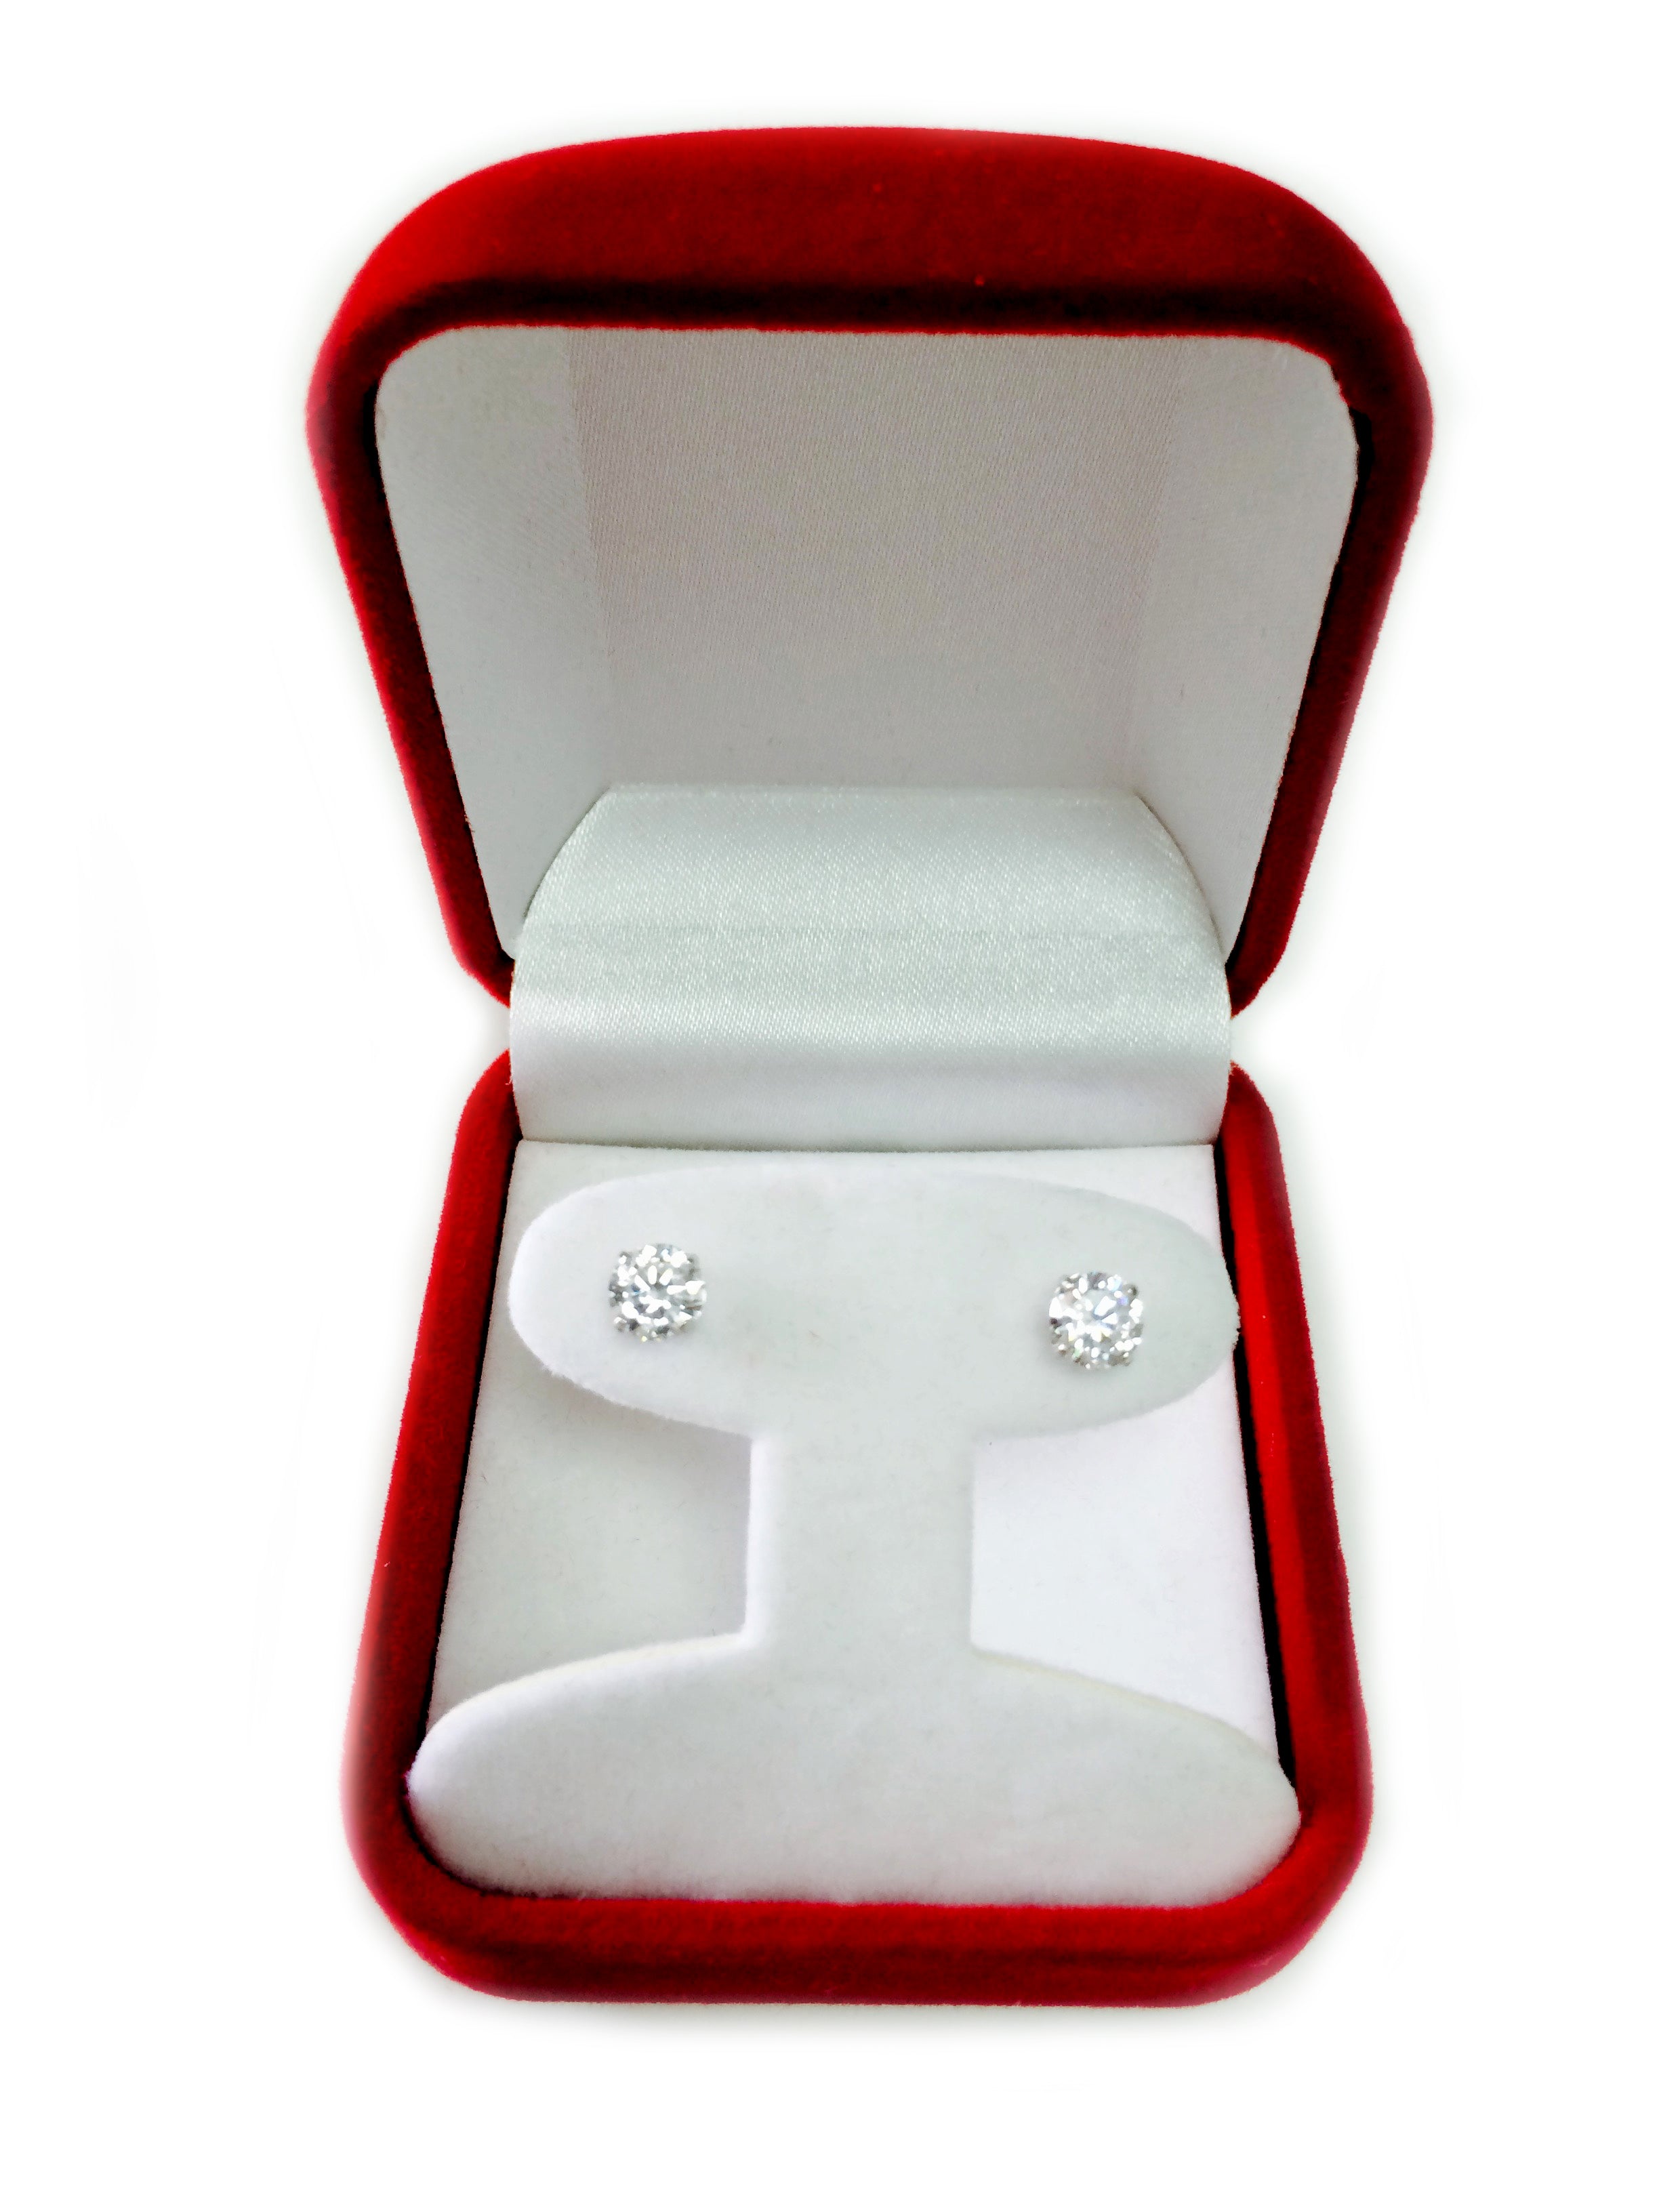 14k White Gold Round Cut White Cubic Zirconia Stud Earrings fine designer jewelry for men and women